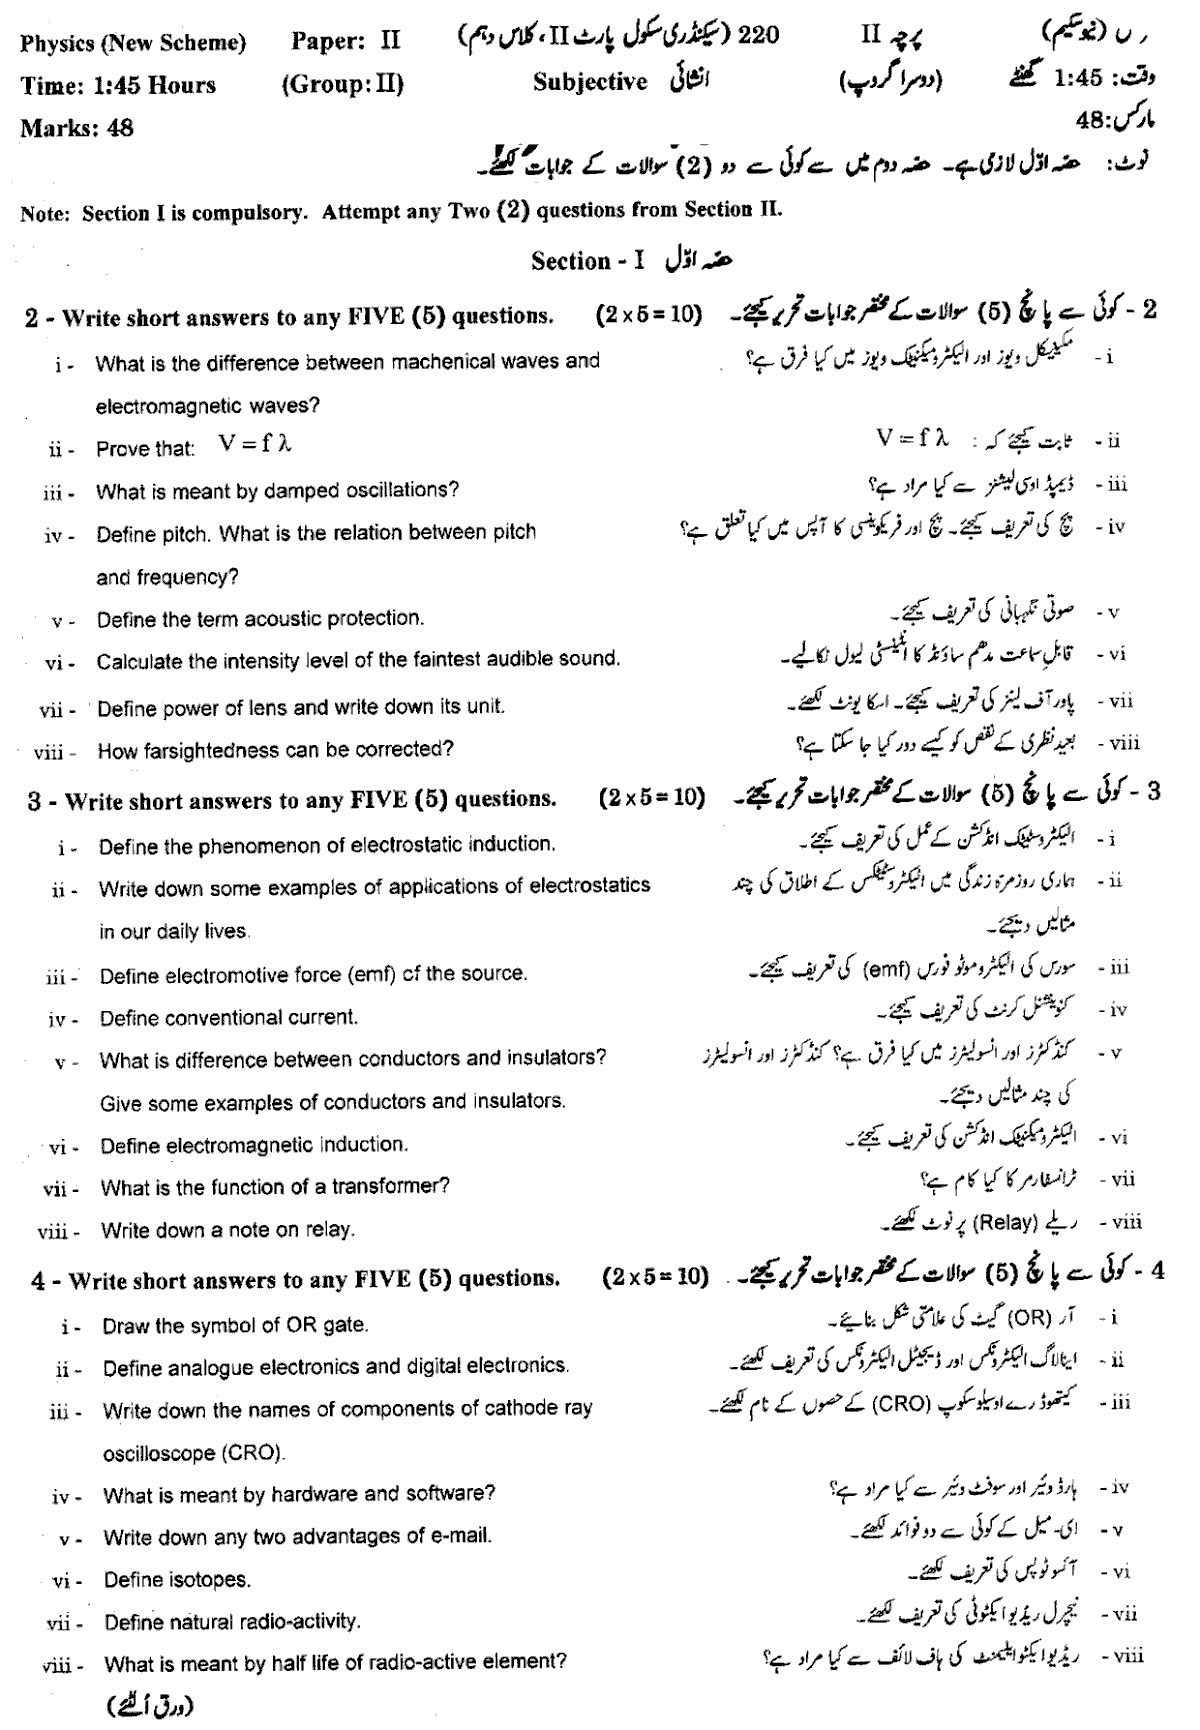 Physics Group 2 Subjective 10th Class Past Papers 2020